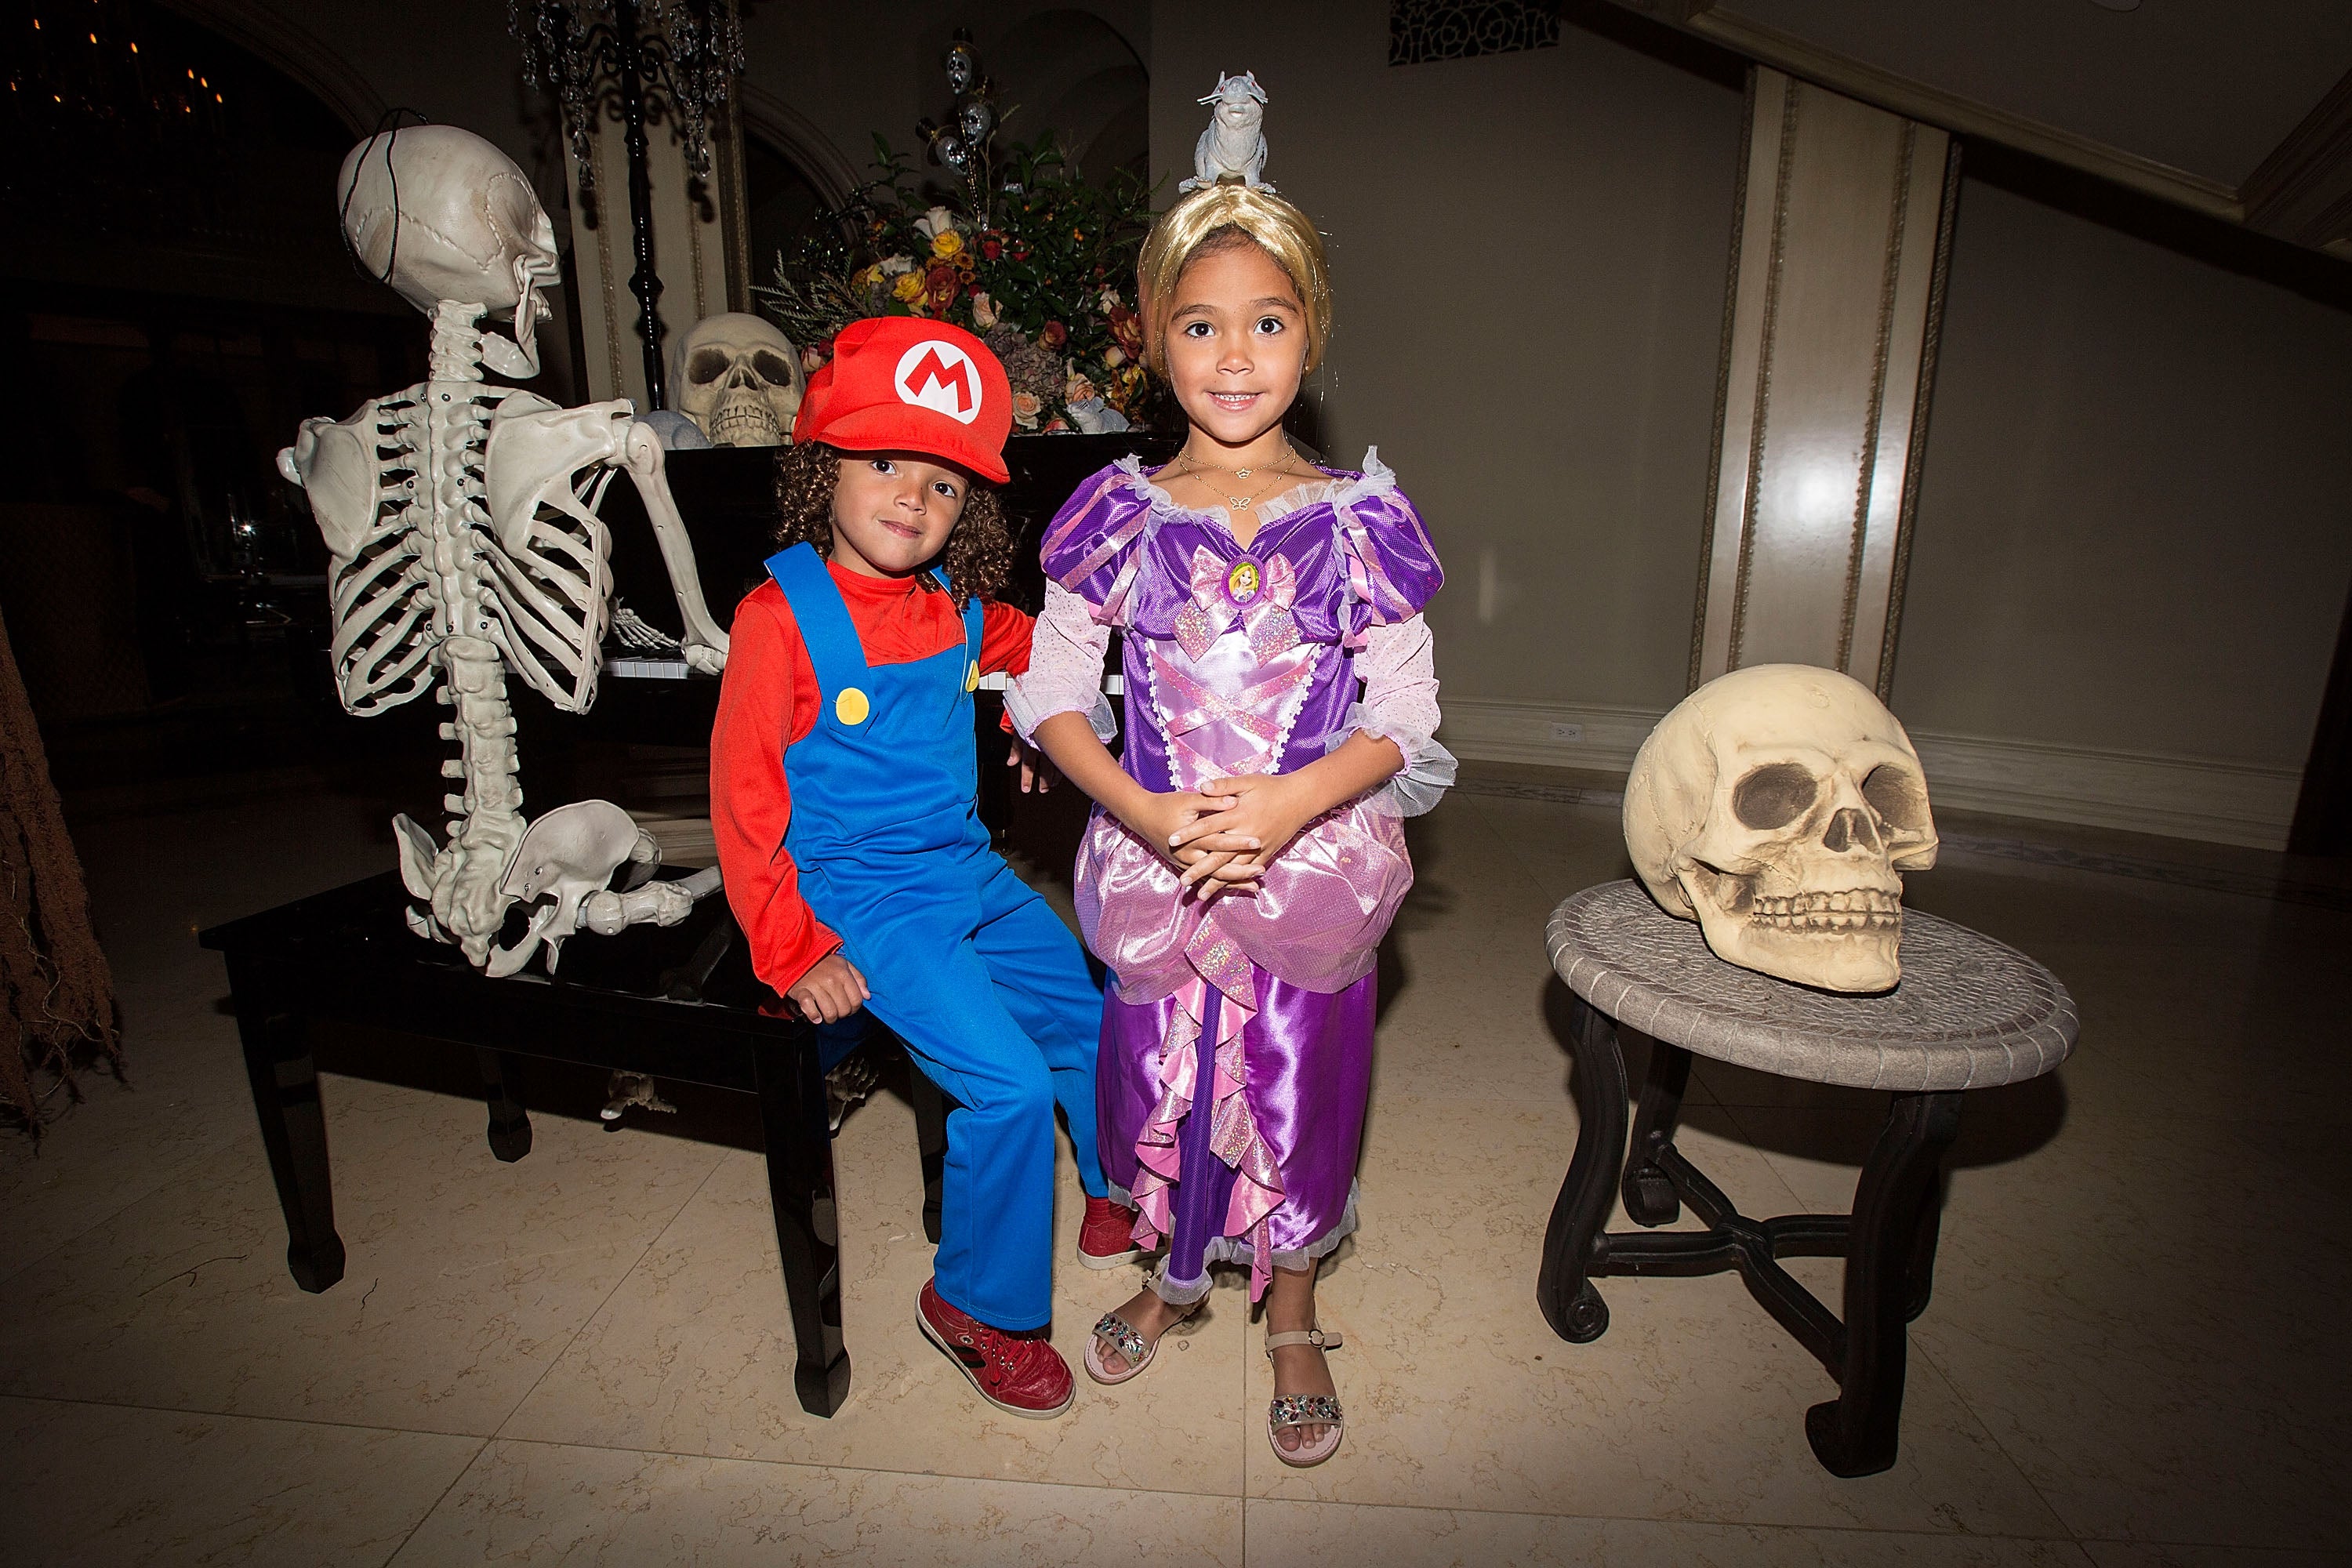 Trick or Treat: What Our Favorite Celebs Wore for Halloween
